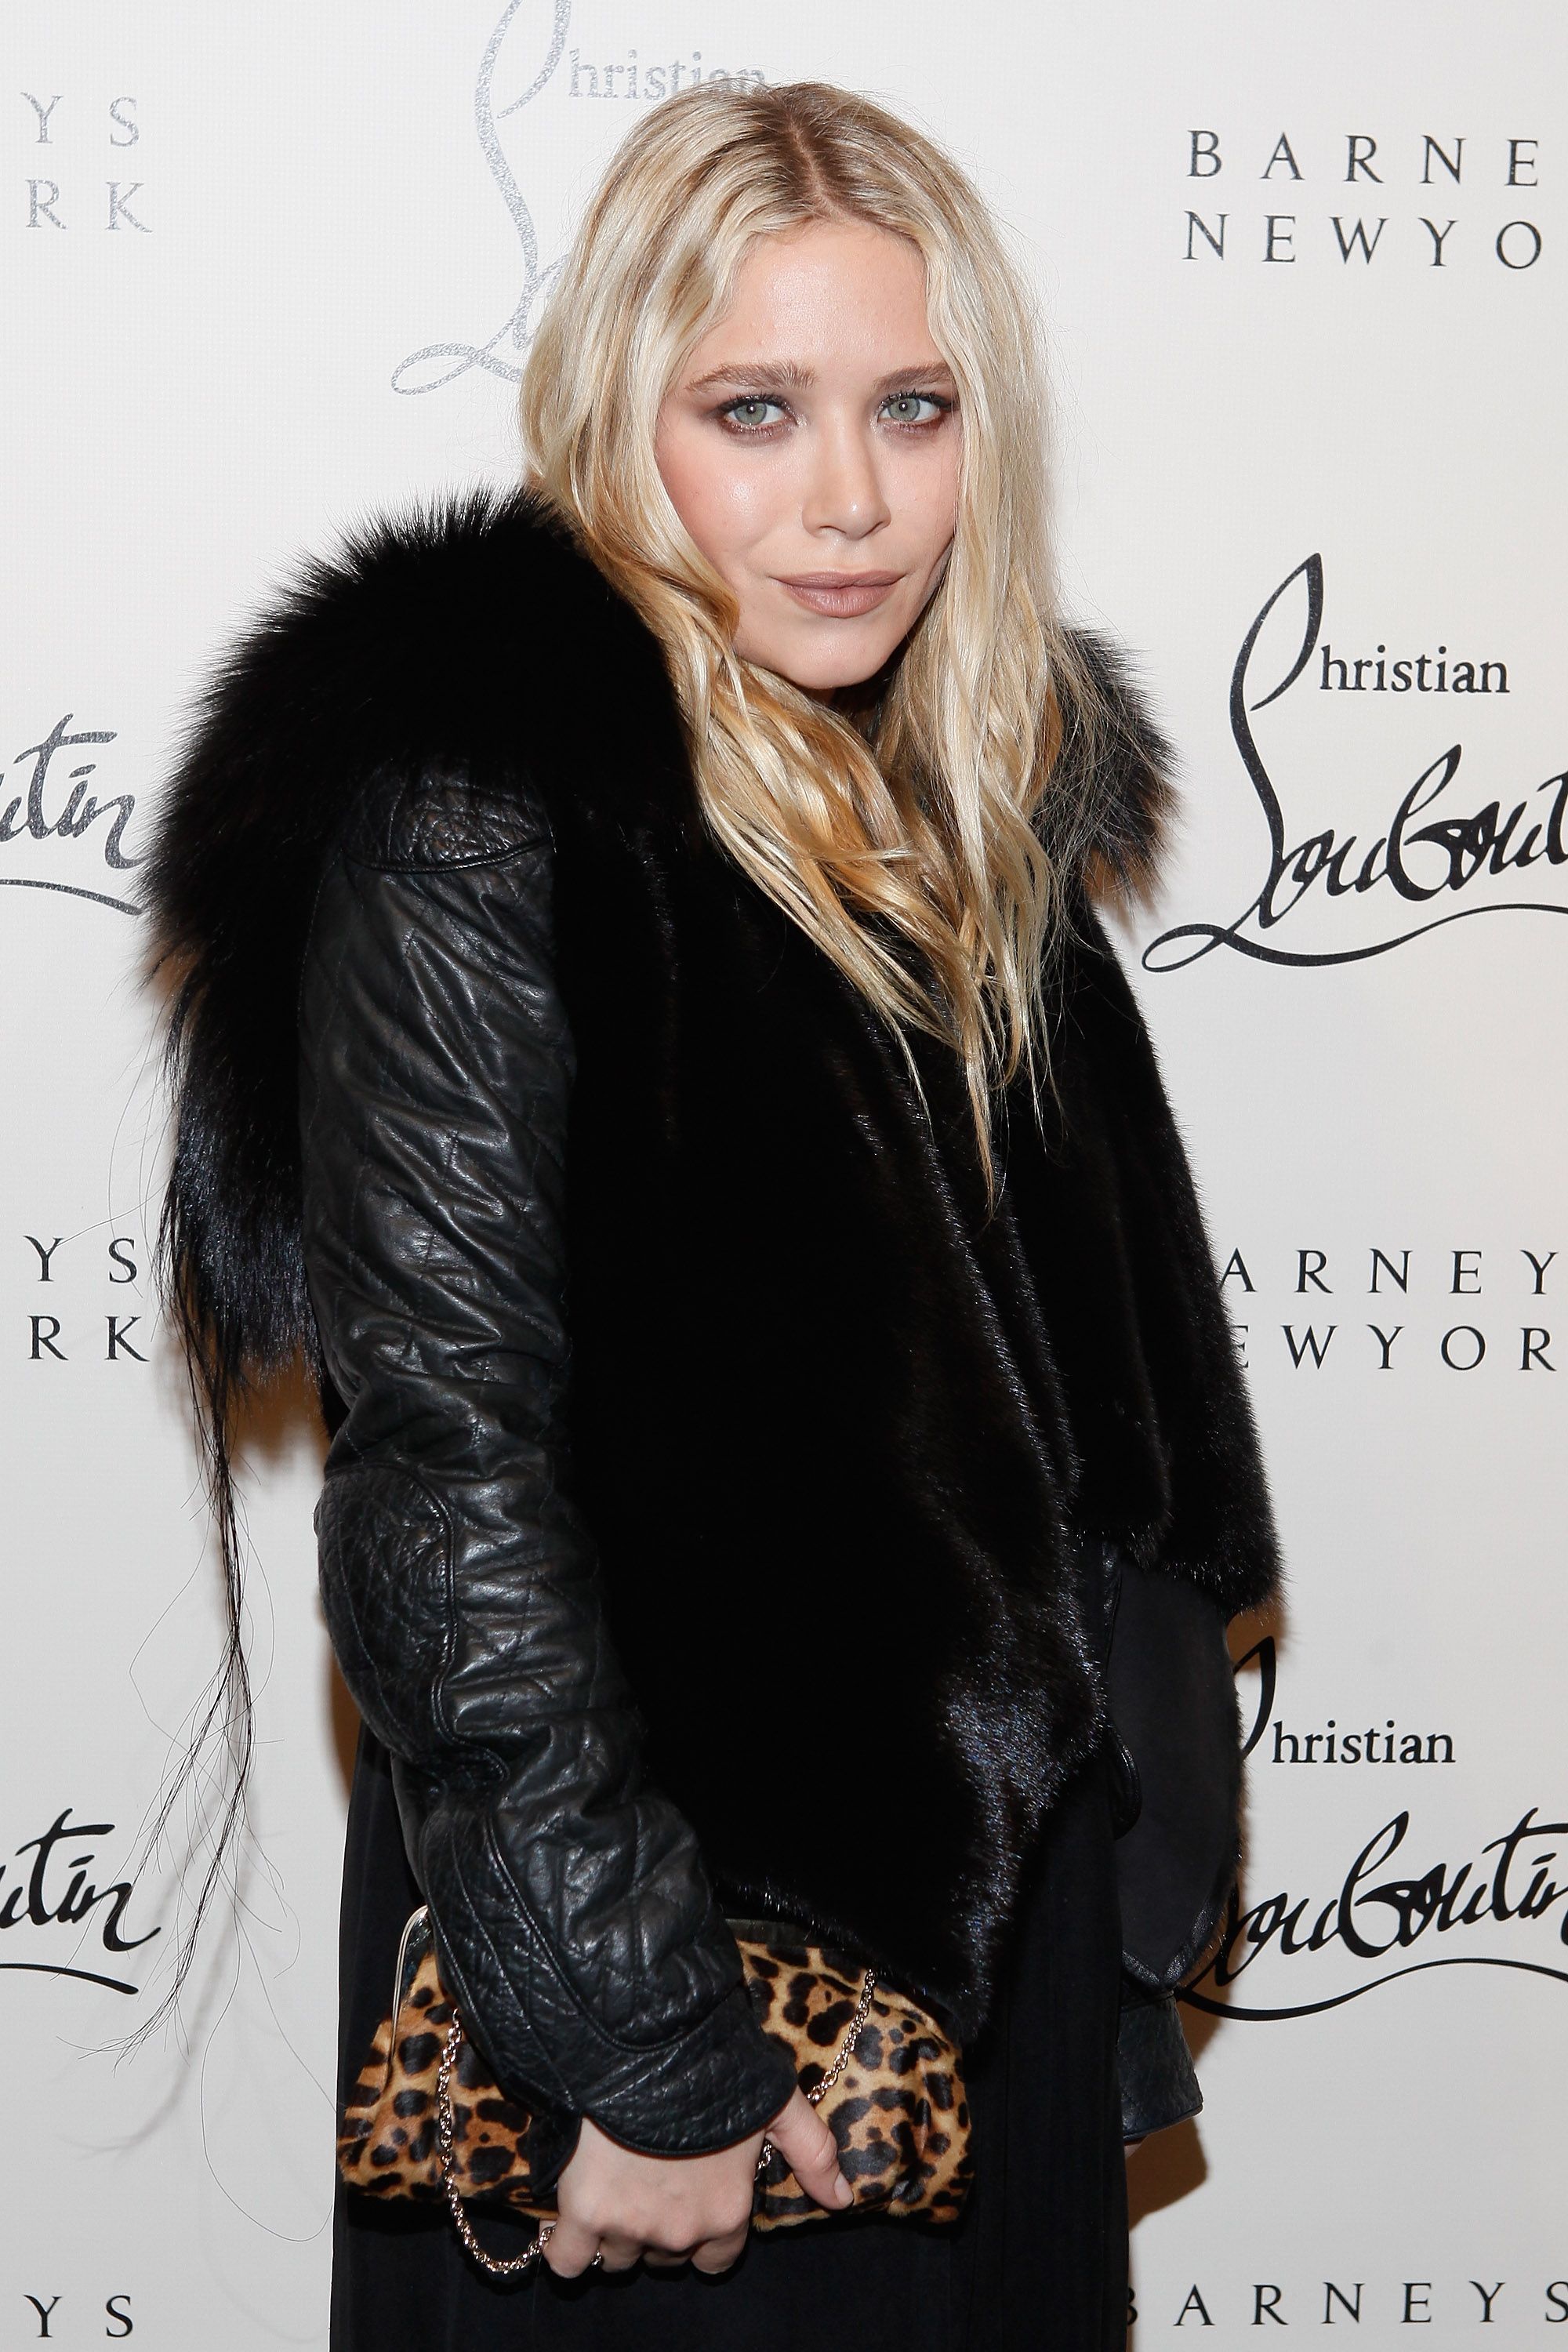 Mary-Kate Olsen during the Christian attends the Louboutin Cocktail party at Barneys New York on November 1, 2011 in New York City. | Photo: Getty Images